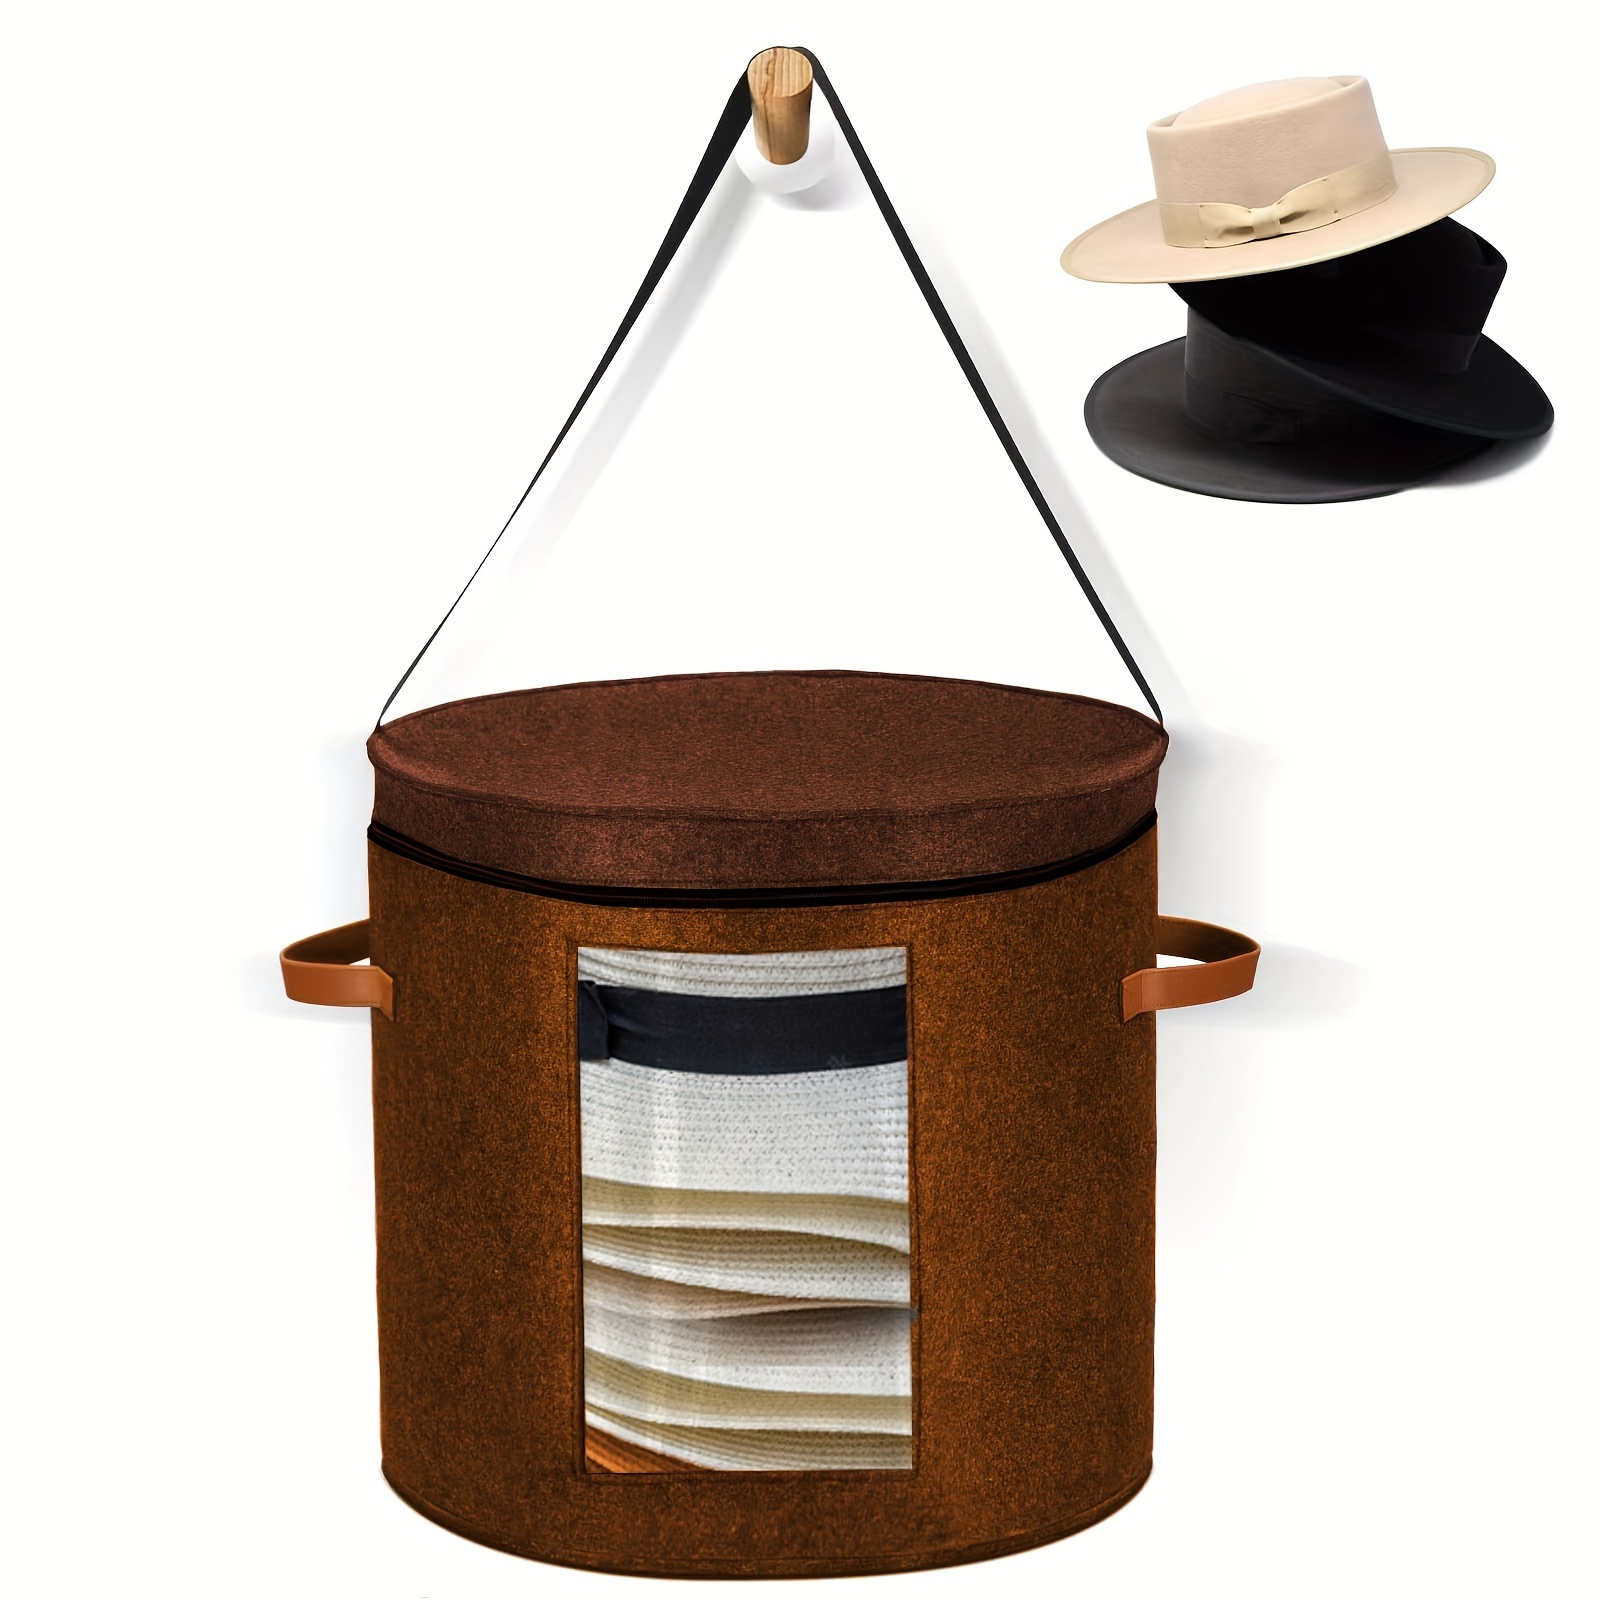 

1pc Round Hat Storage Box With Lid, Foldable Large Basket With Handles For Clothes, Blankets, Quilts, Toys, Household Wardrobe Organizer, Space Saving Organizer Of Closet, Bedroom, Home, Dorm